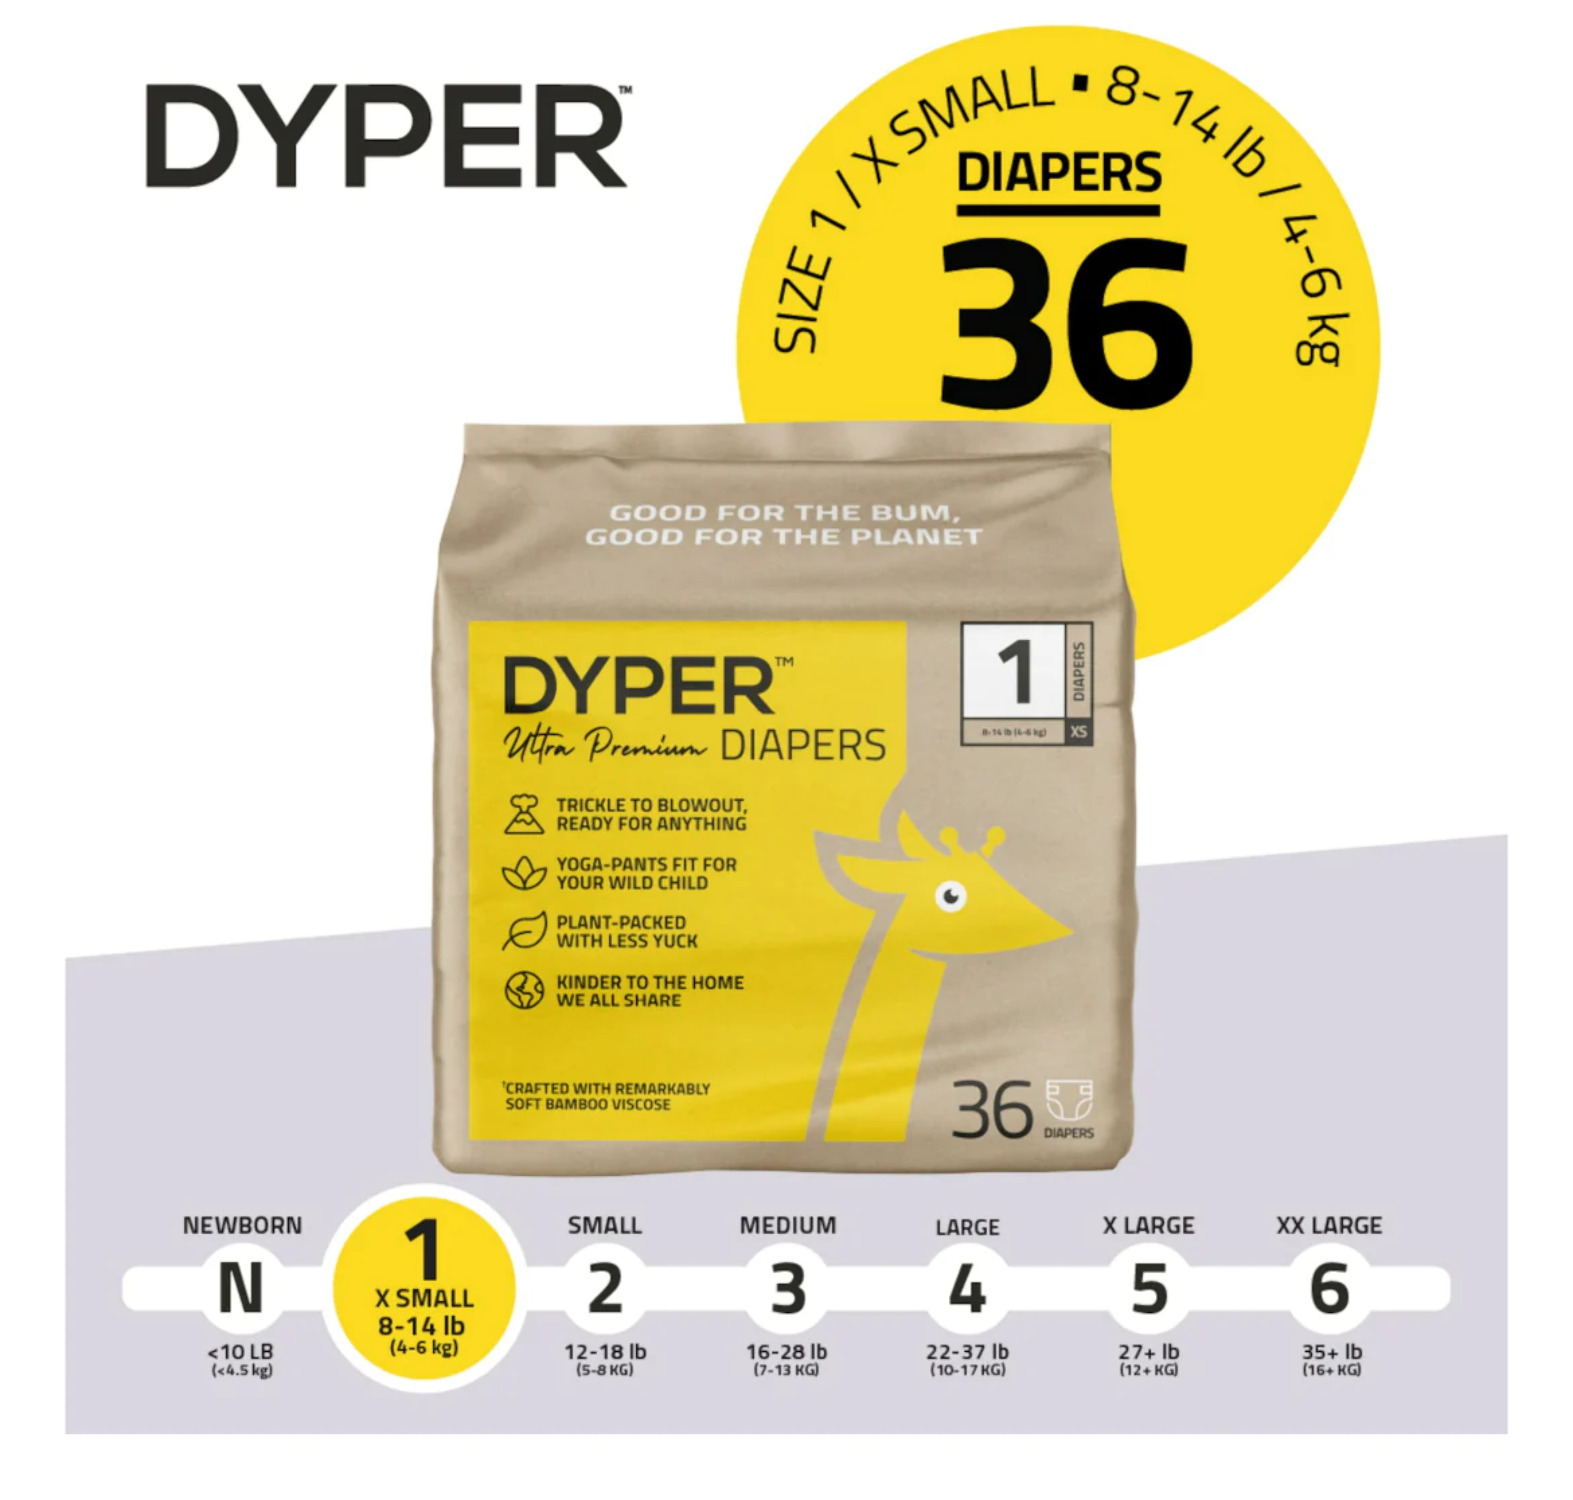 DYPER Ultra Premium Diapers Size 1, 36 Diapers (Select For More Options) - image 3 of 3